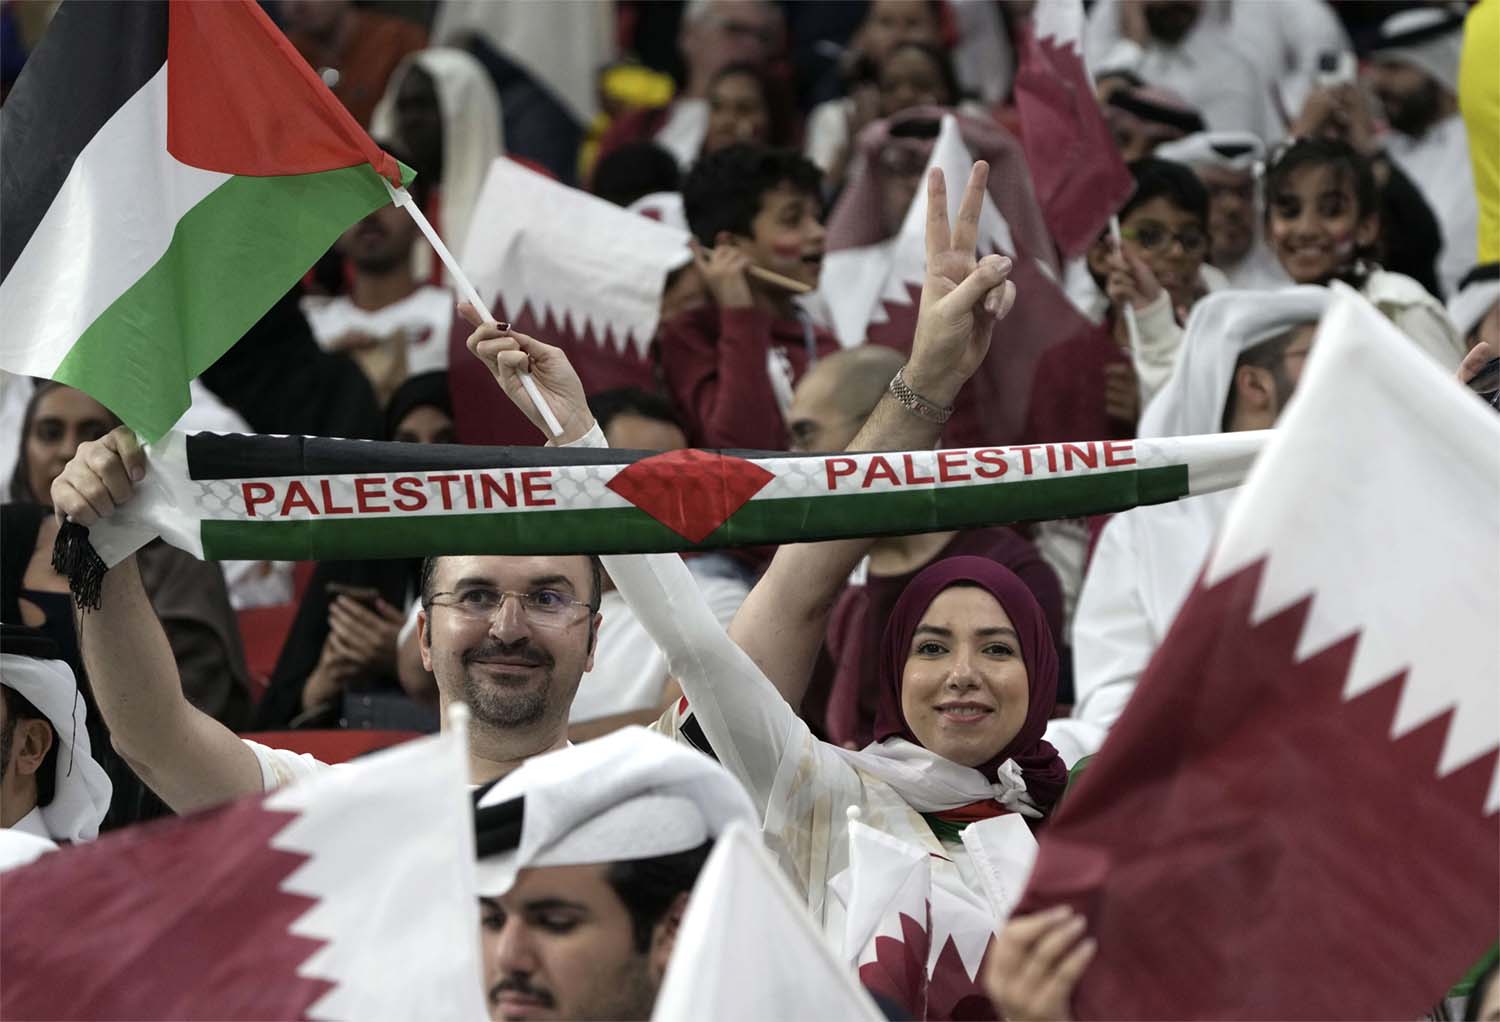 The Israeli-Palestinian conflict catches up with Qatar World Cup